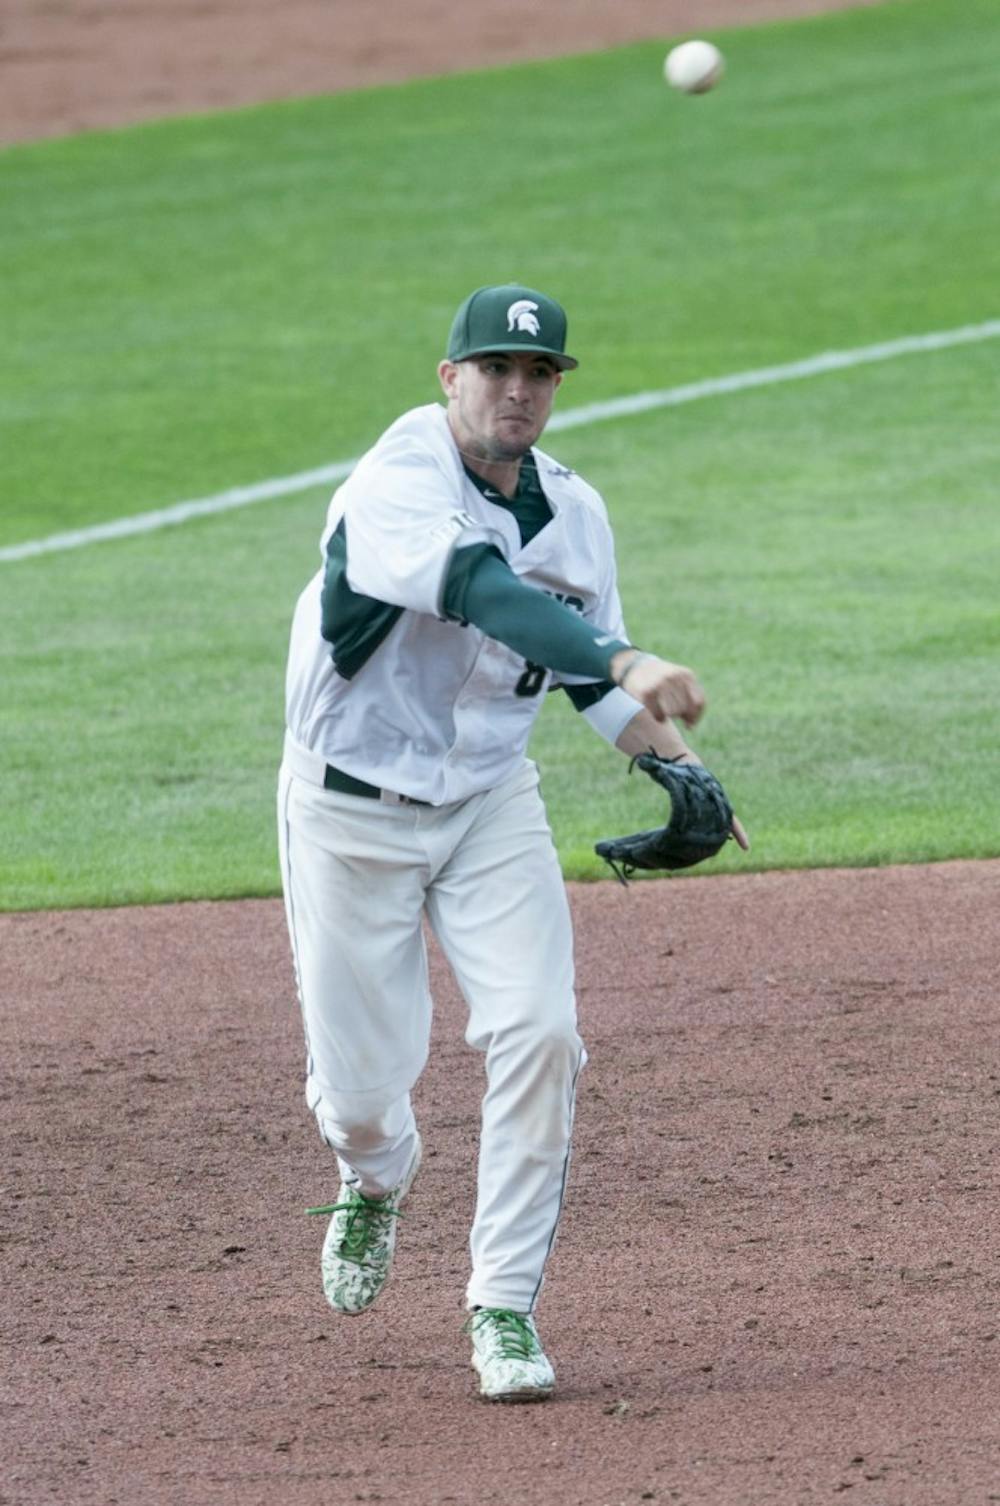 <p>Senior infielder Justin Hovis throws to first base in the third inning during the baseball exhibition game against Air Force on Sept. 19, 2015 at McLane Stadium. MSU baseball season begins in February. Jack Stephan/The State News</p>